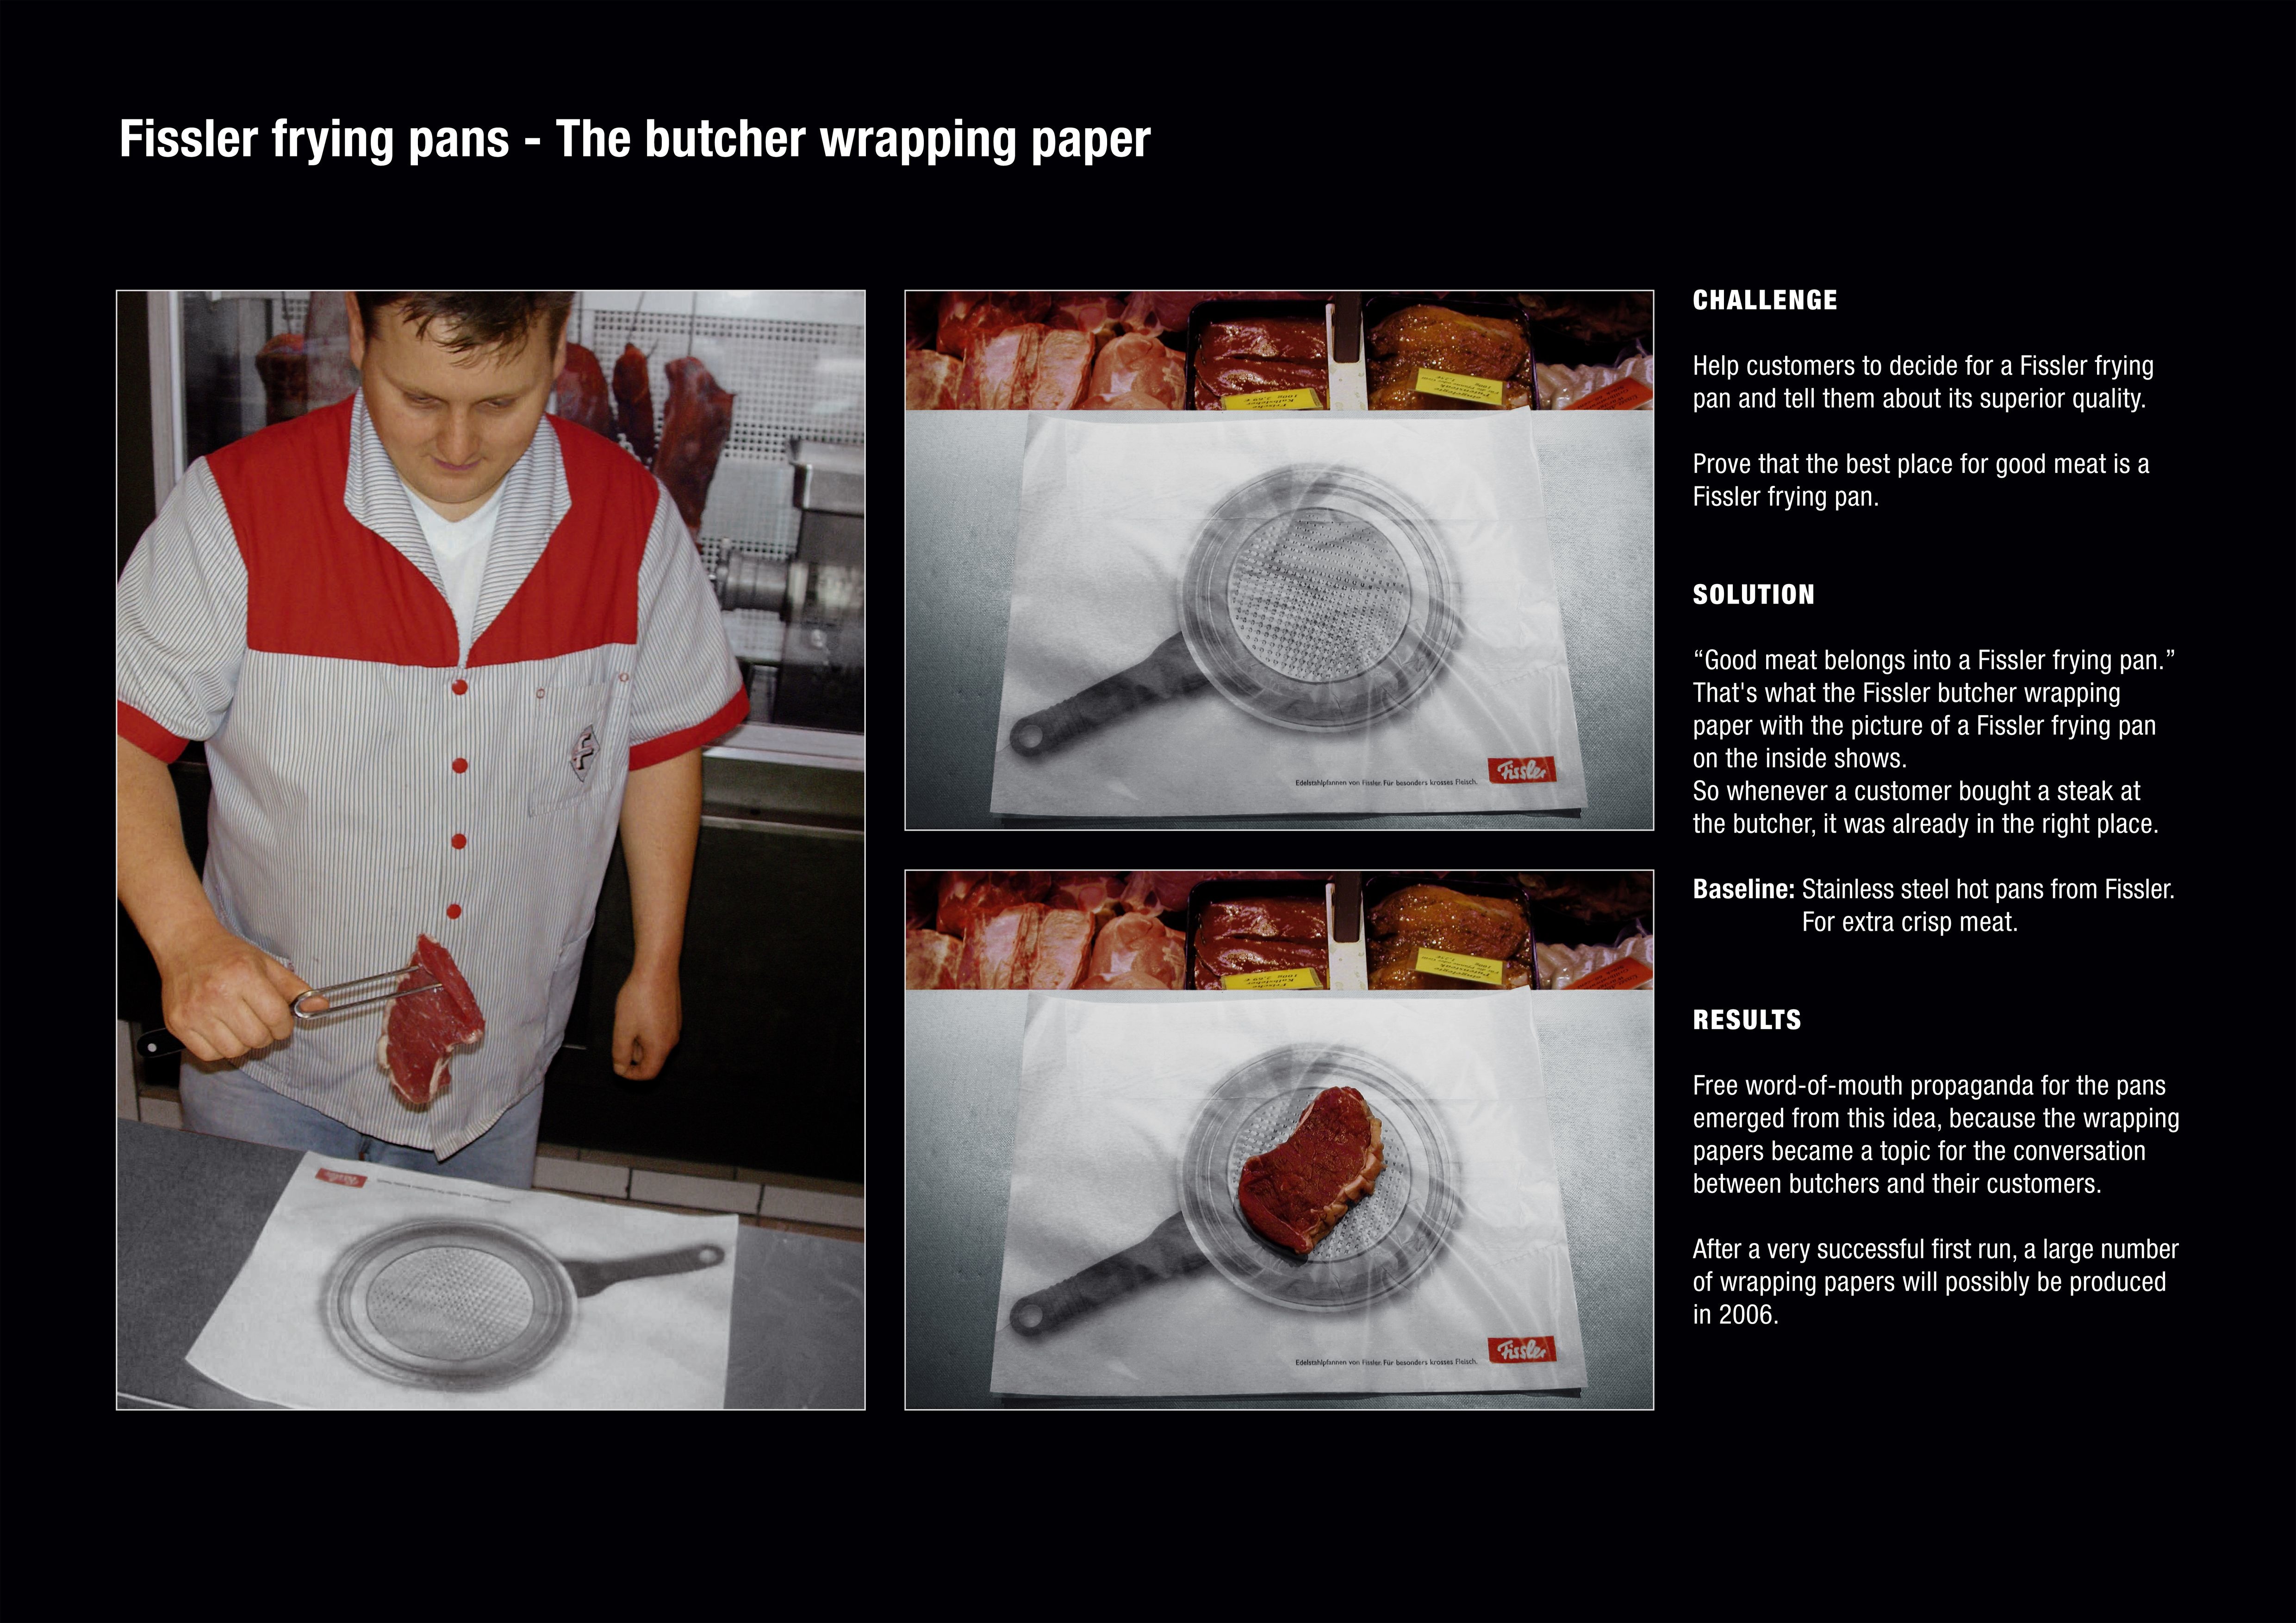 BUTCHER WRAPPING PAPER